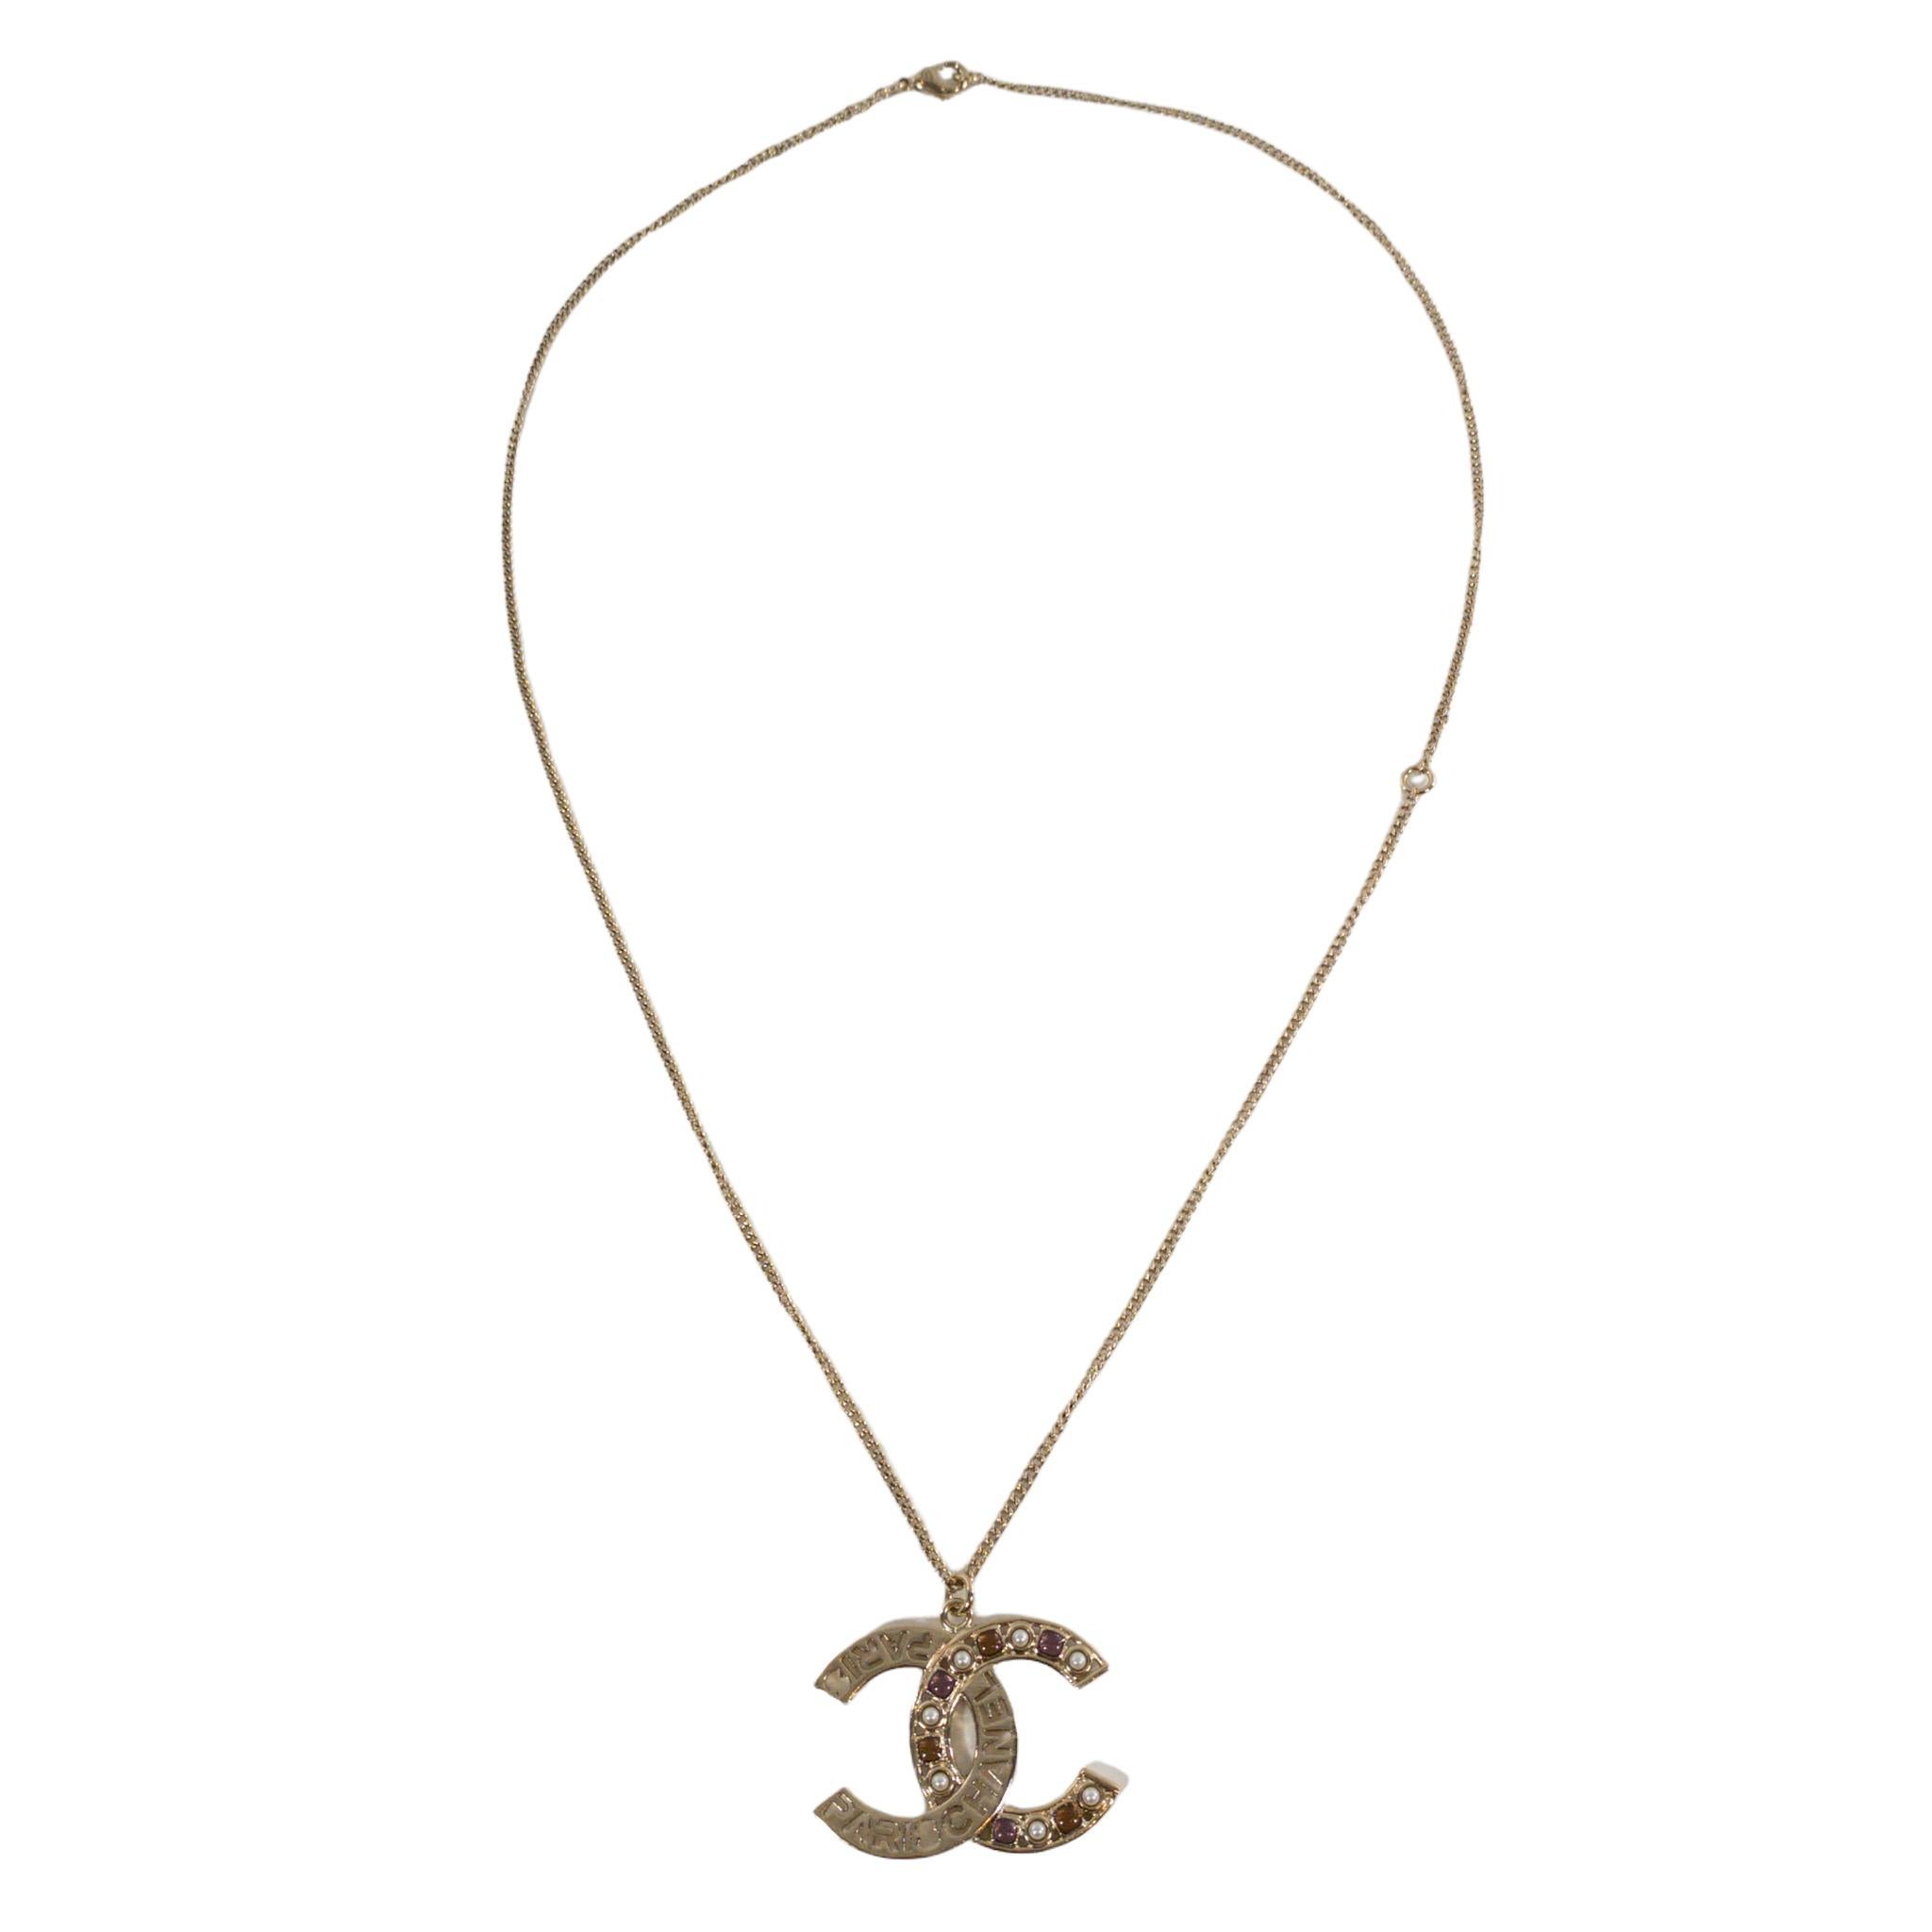 Chanel Paris Gold CC Necklace with Stones

This is an authentic Chanel necklace with cut-out lettering, pearls and stones. Gold tone metal.

Additional information:
Chain length 11.5” or 8